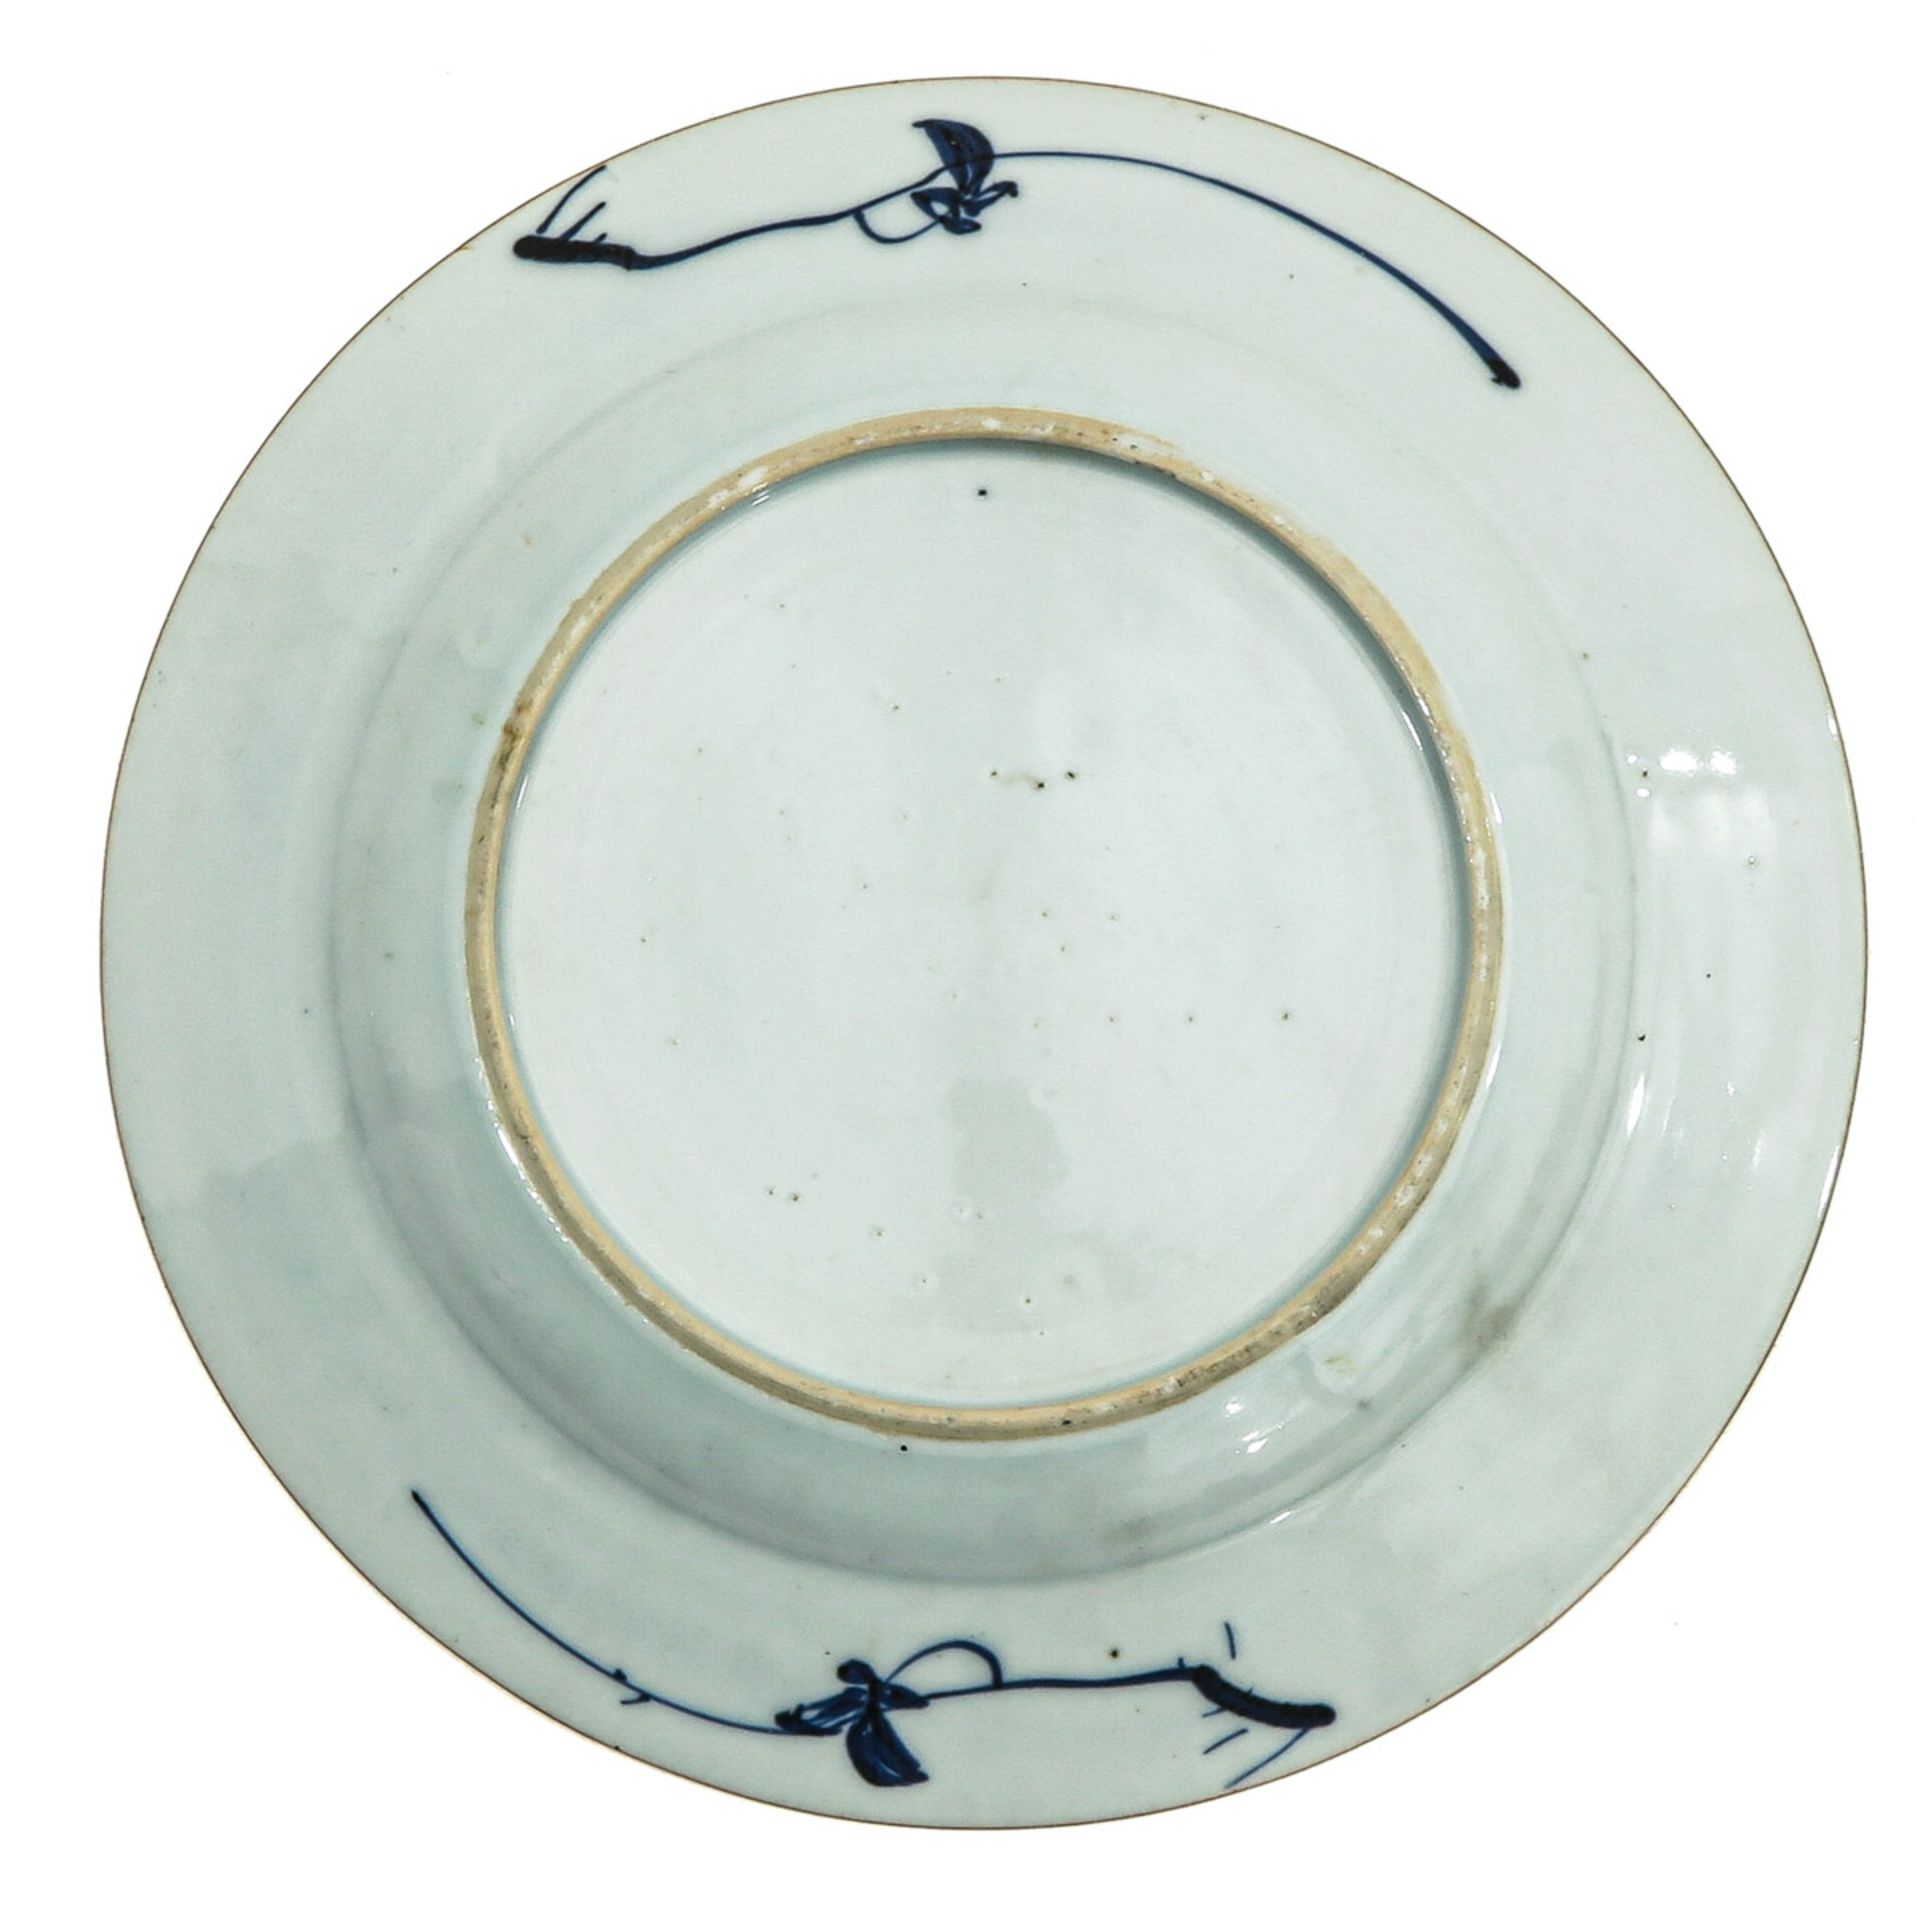 A Series of 3 Blue and White Plates - Image 6 of 10